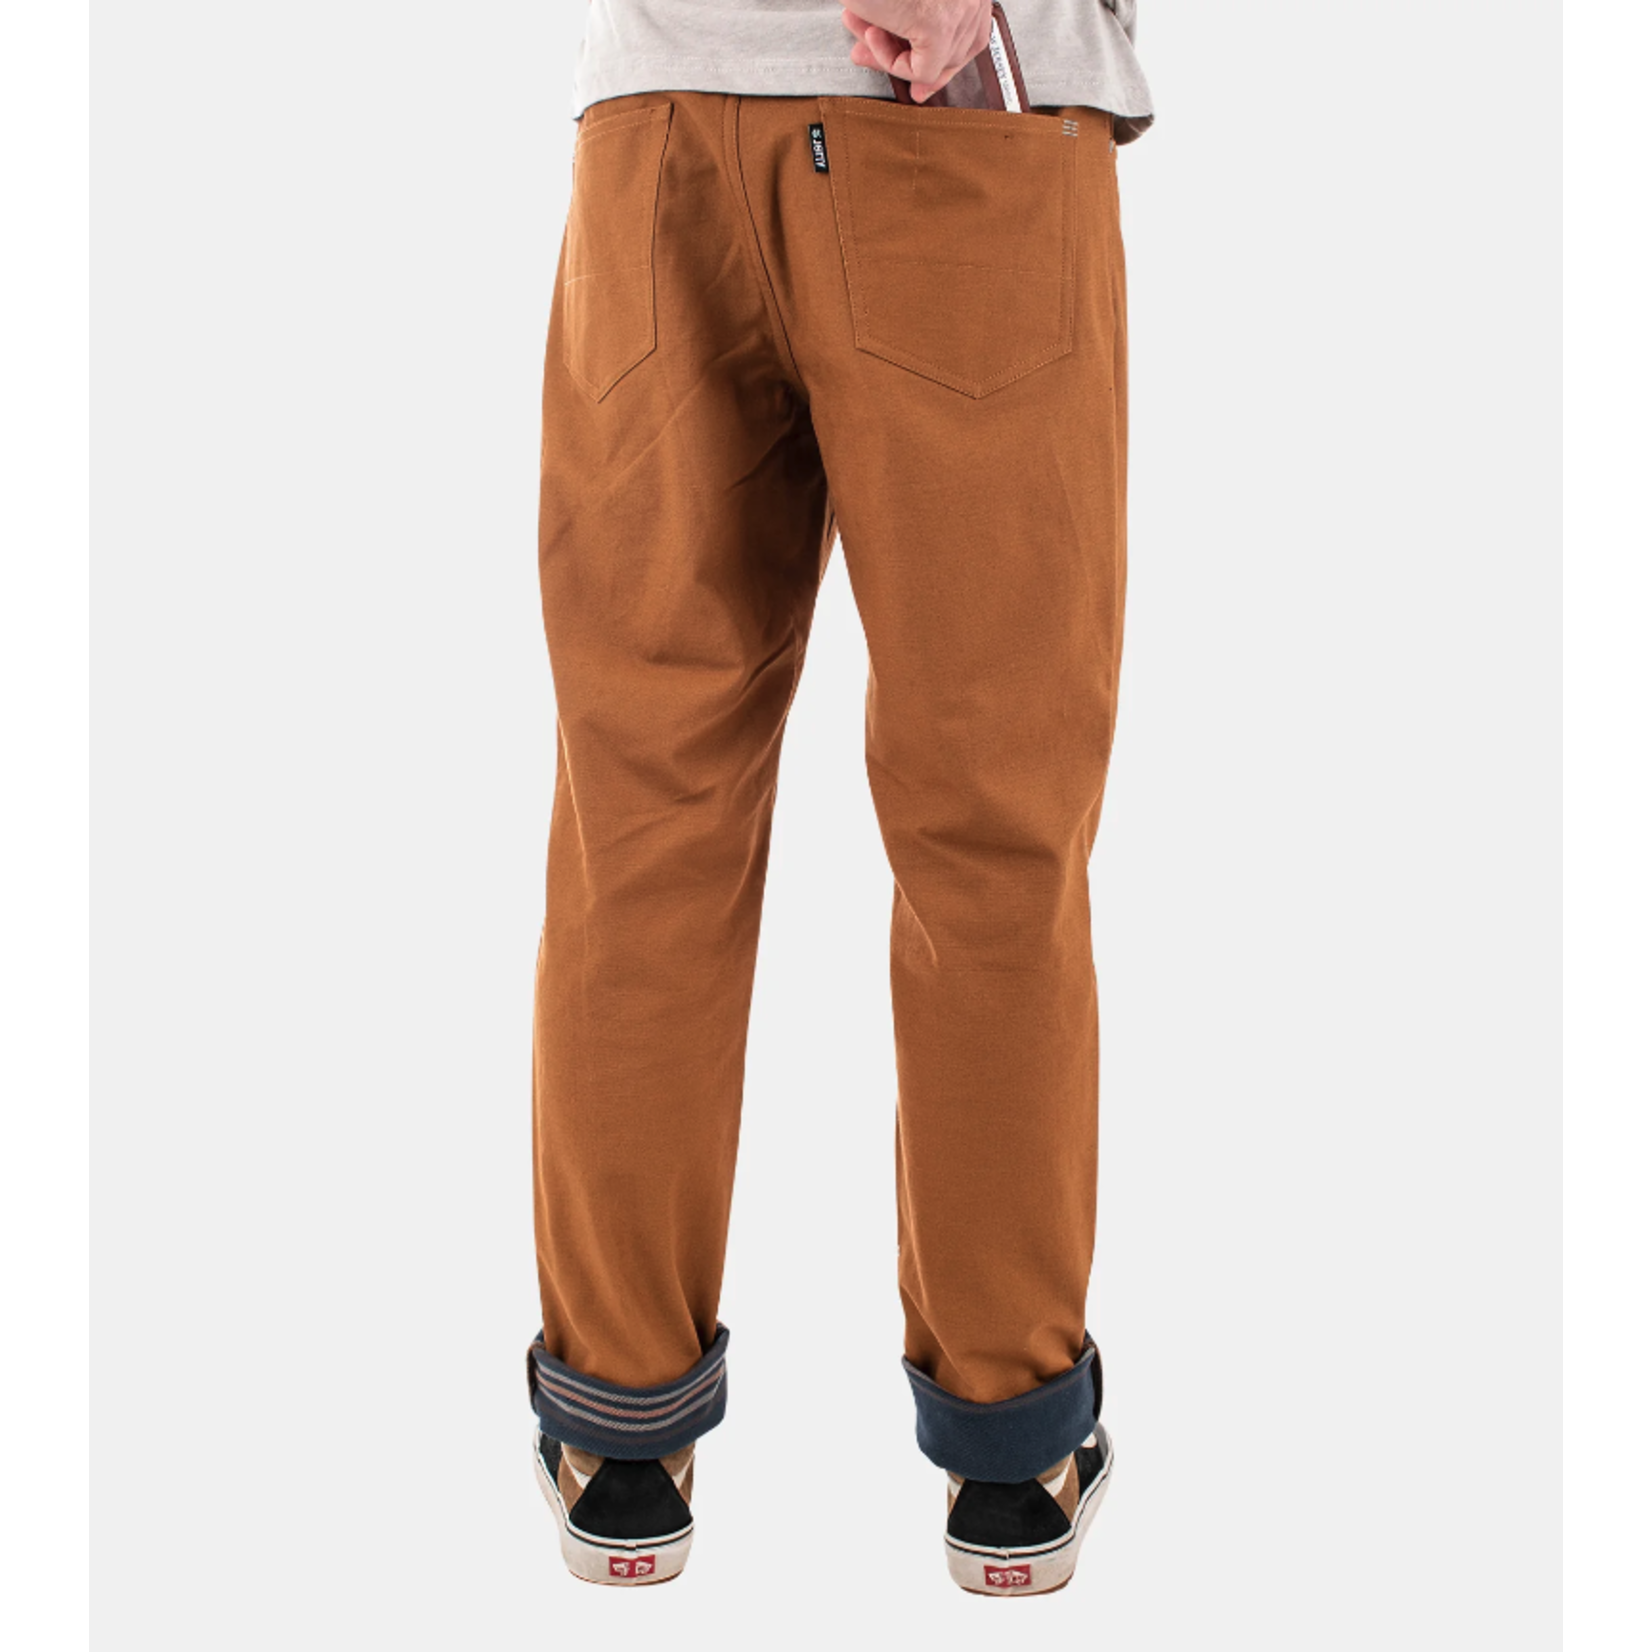 Jetty Mariner Lined Pants